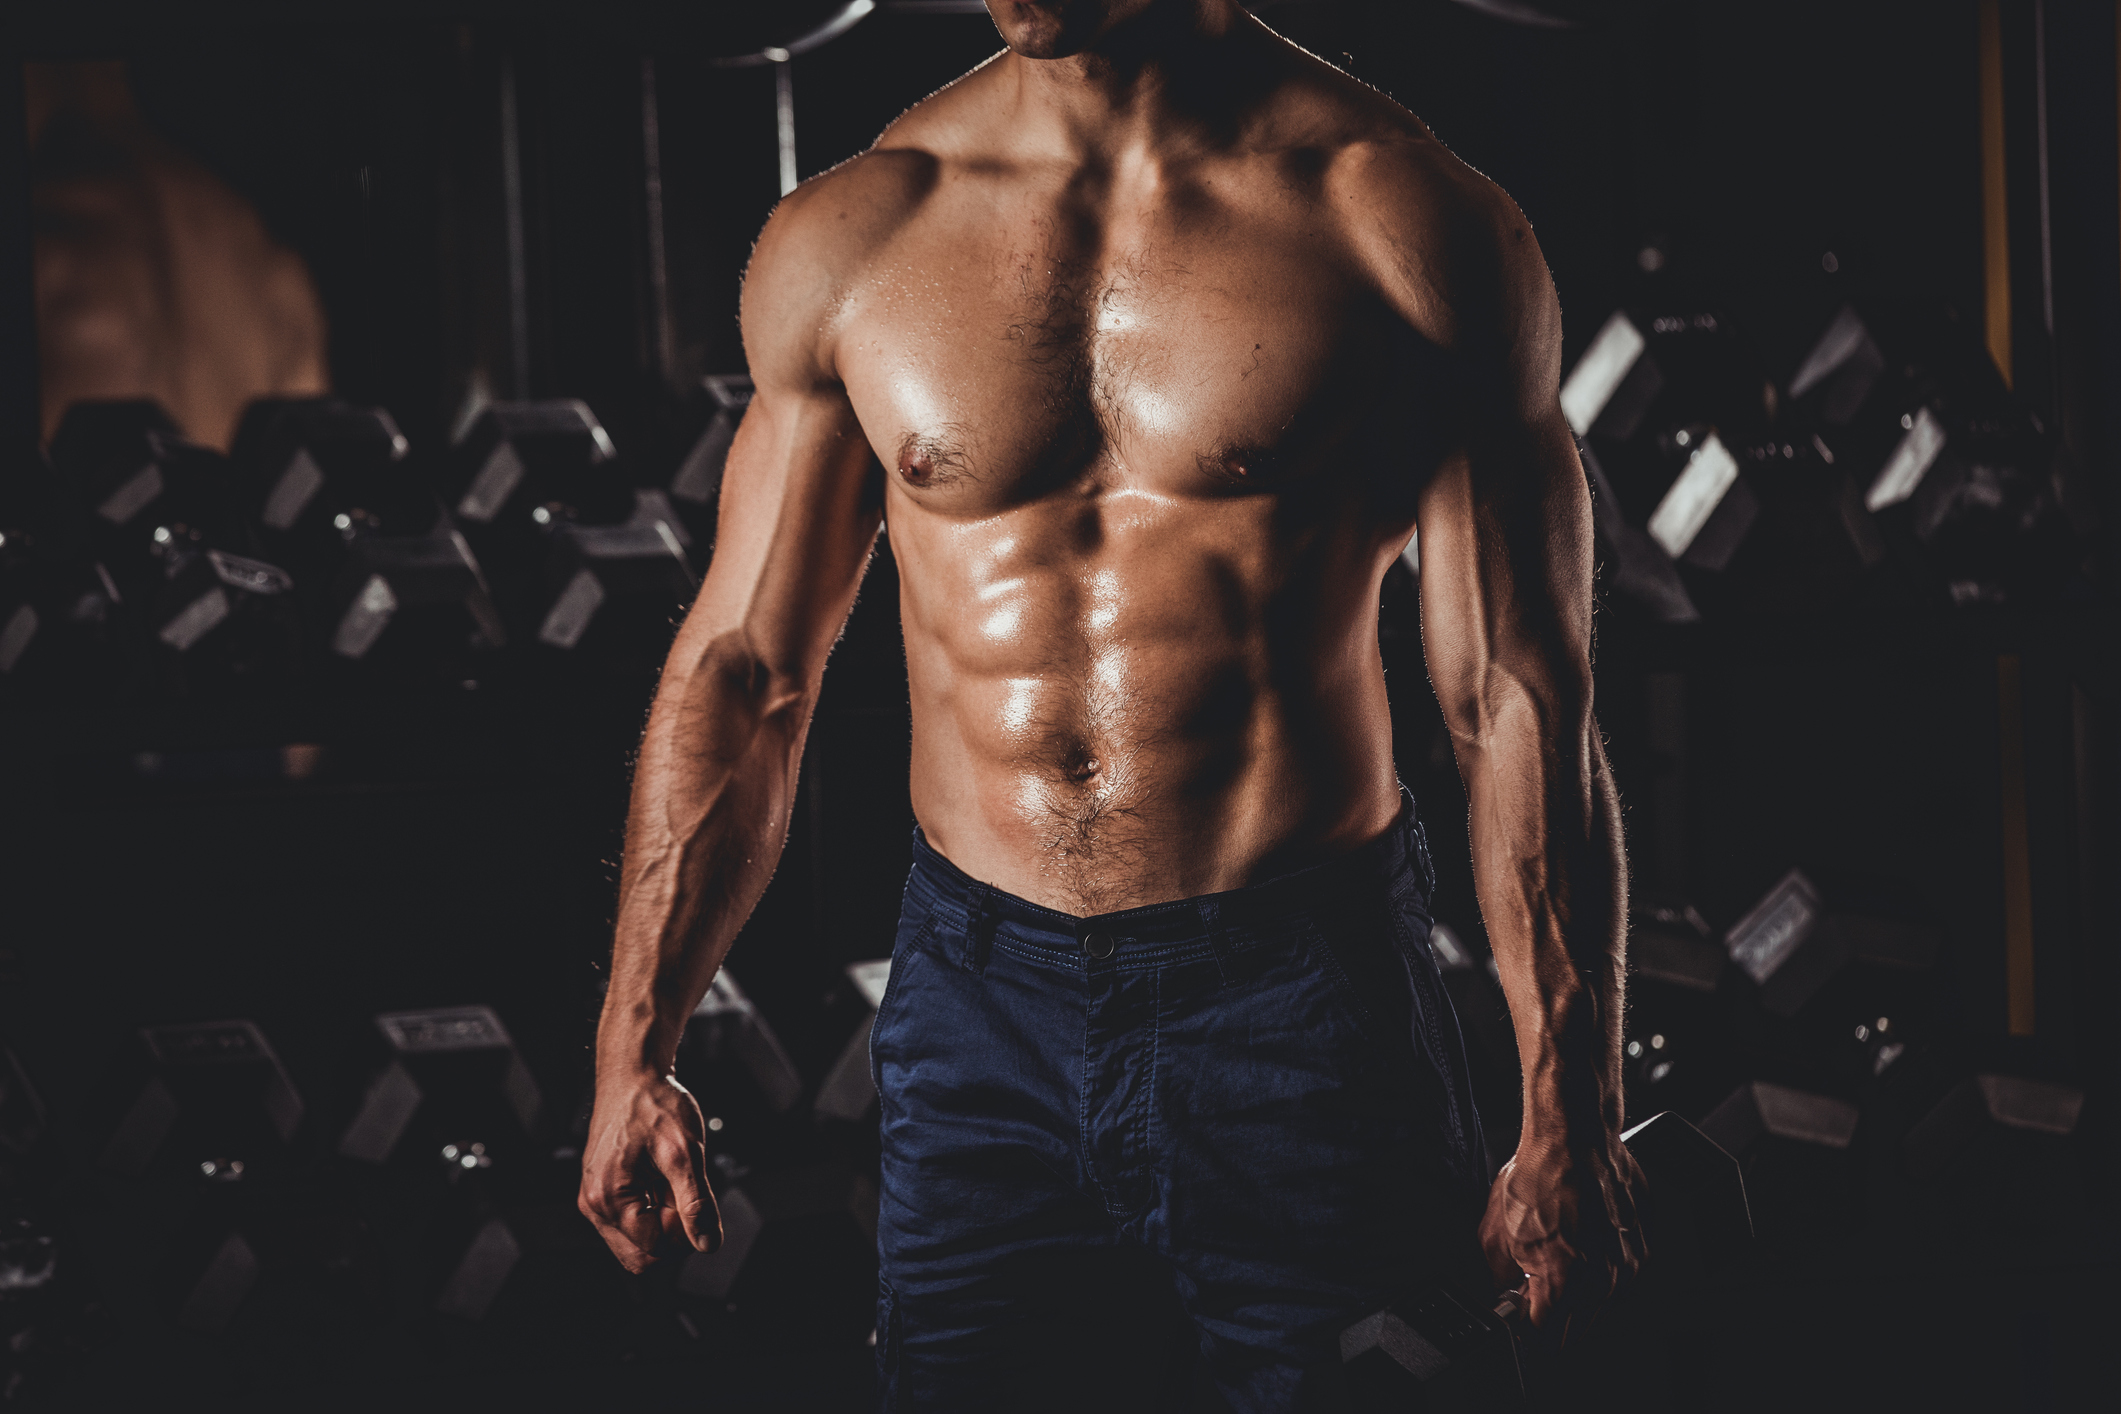 How to get six-pack abs as fast as possible